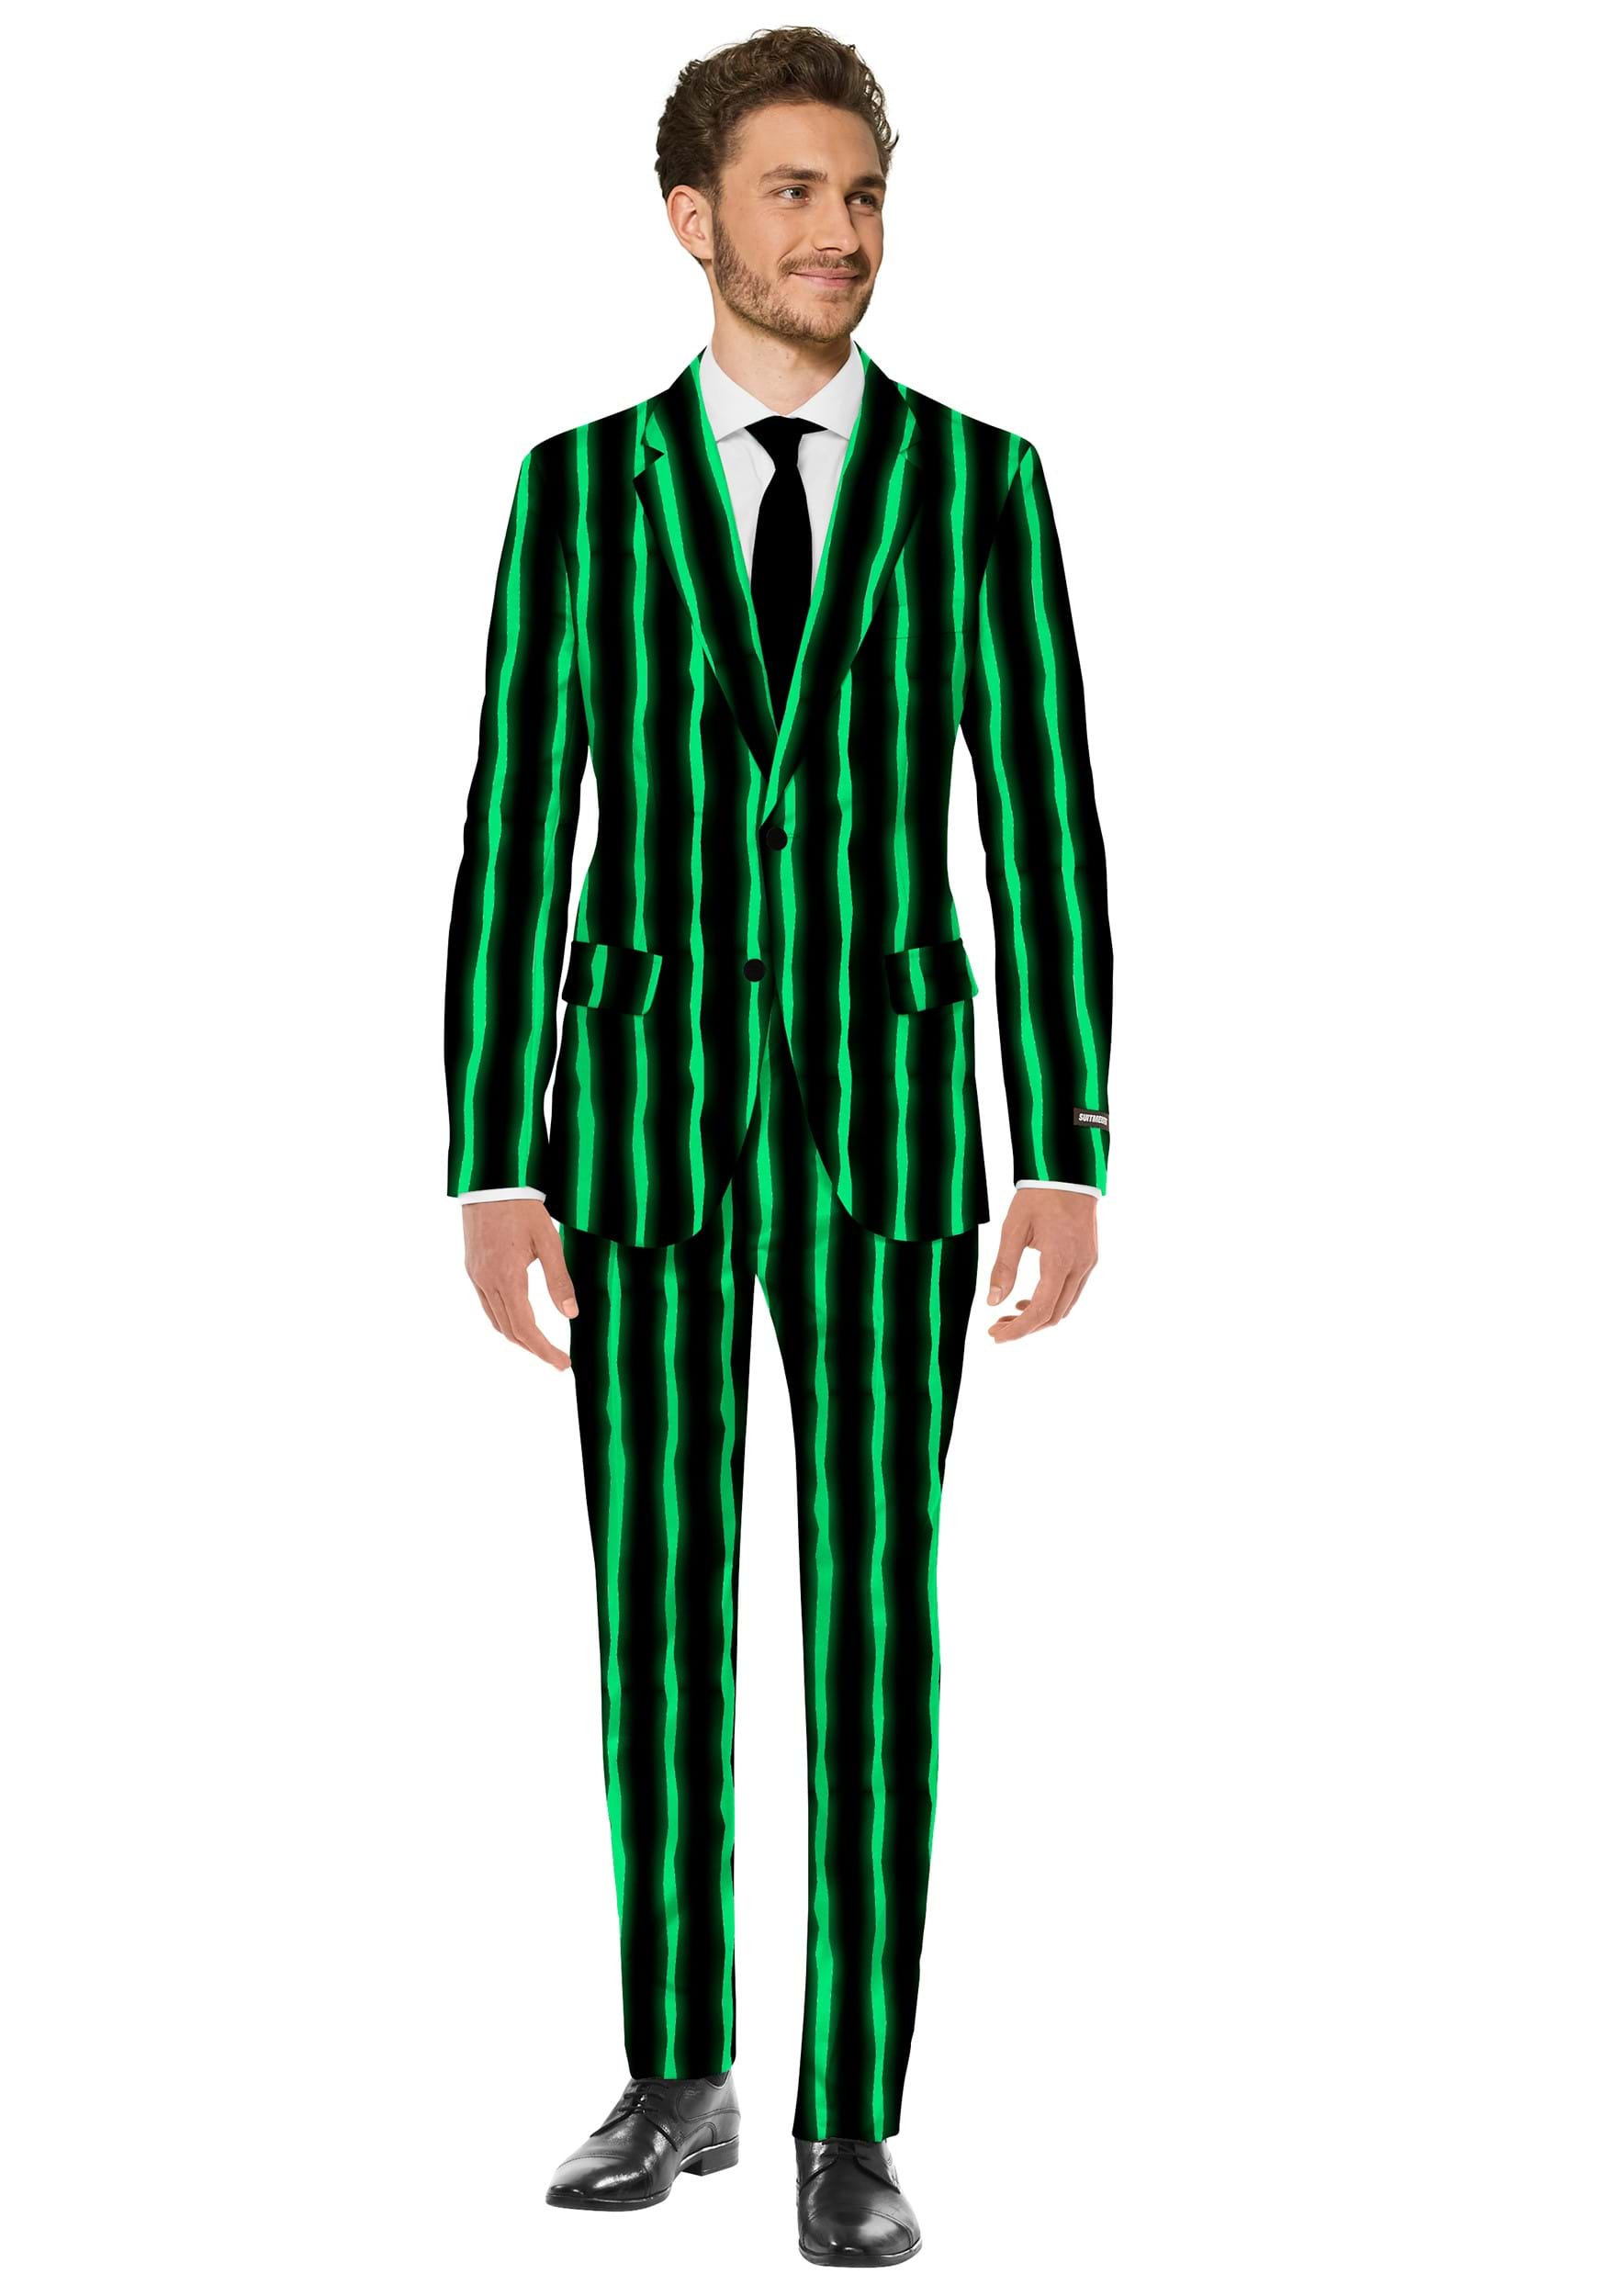 https://images.halloween.com/products/74095/1-1/suitmeister-oversized-glow-in-the-dark-pinstripe-black-suit.jpg